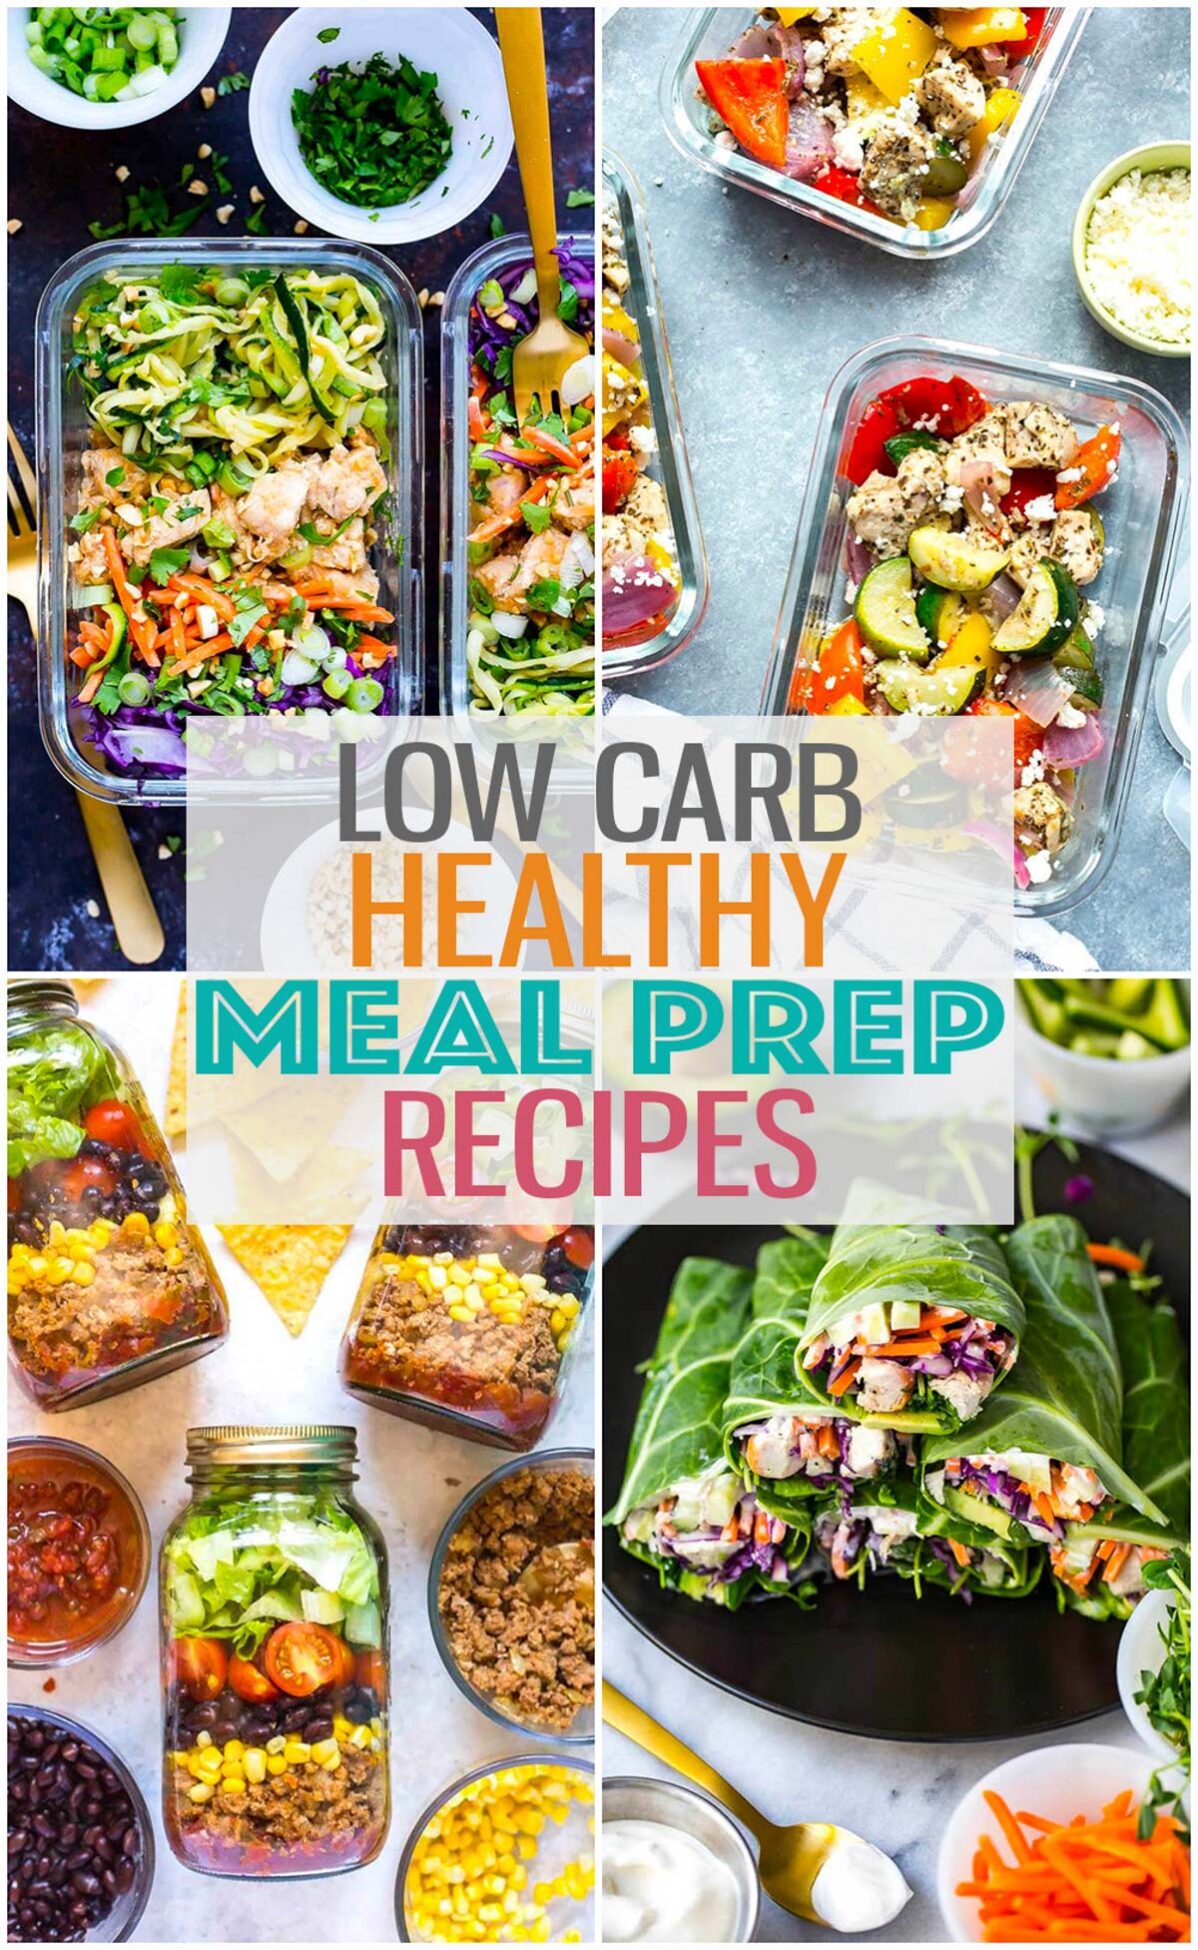 A collage of four different meal prep recipes with the text "Low Carb Healthy Meal Prep Recipes" layered over top.